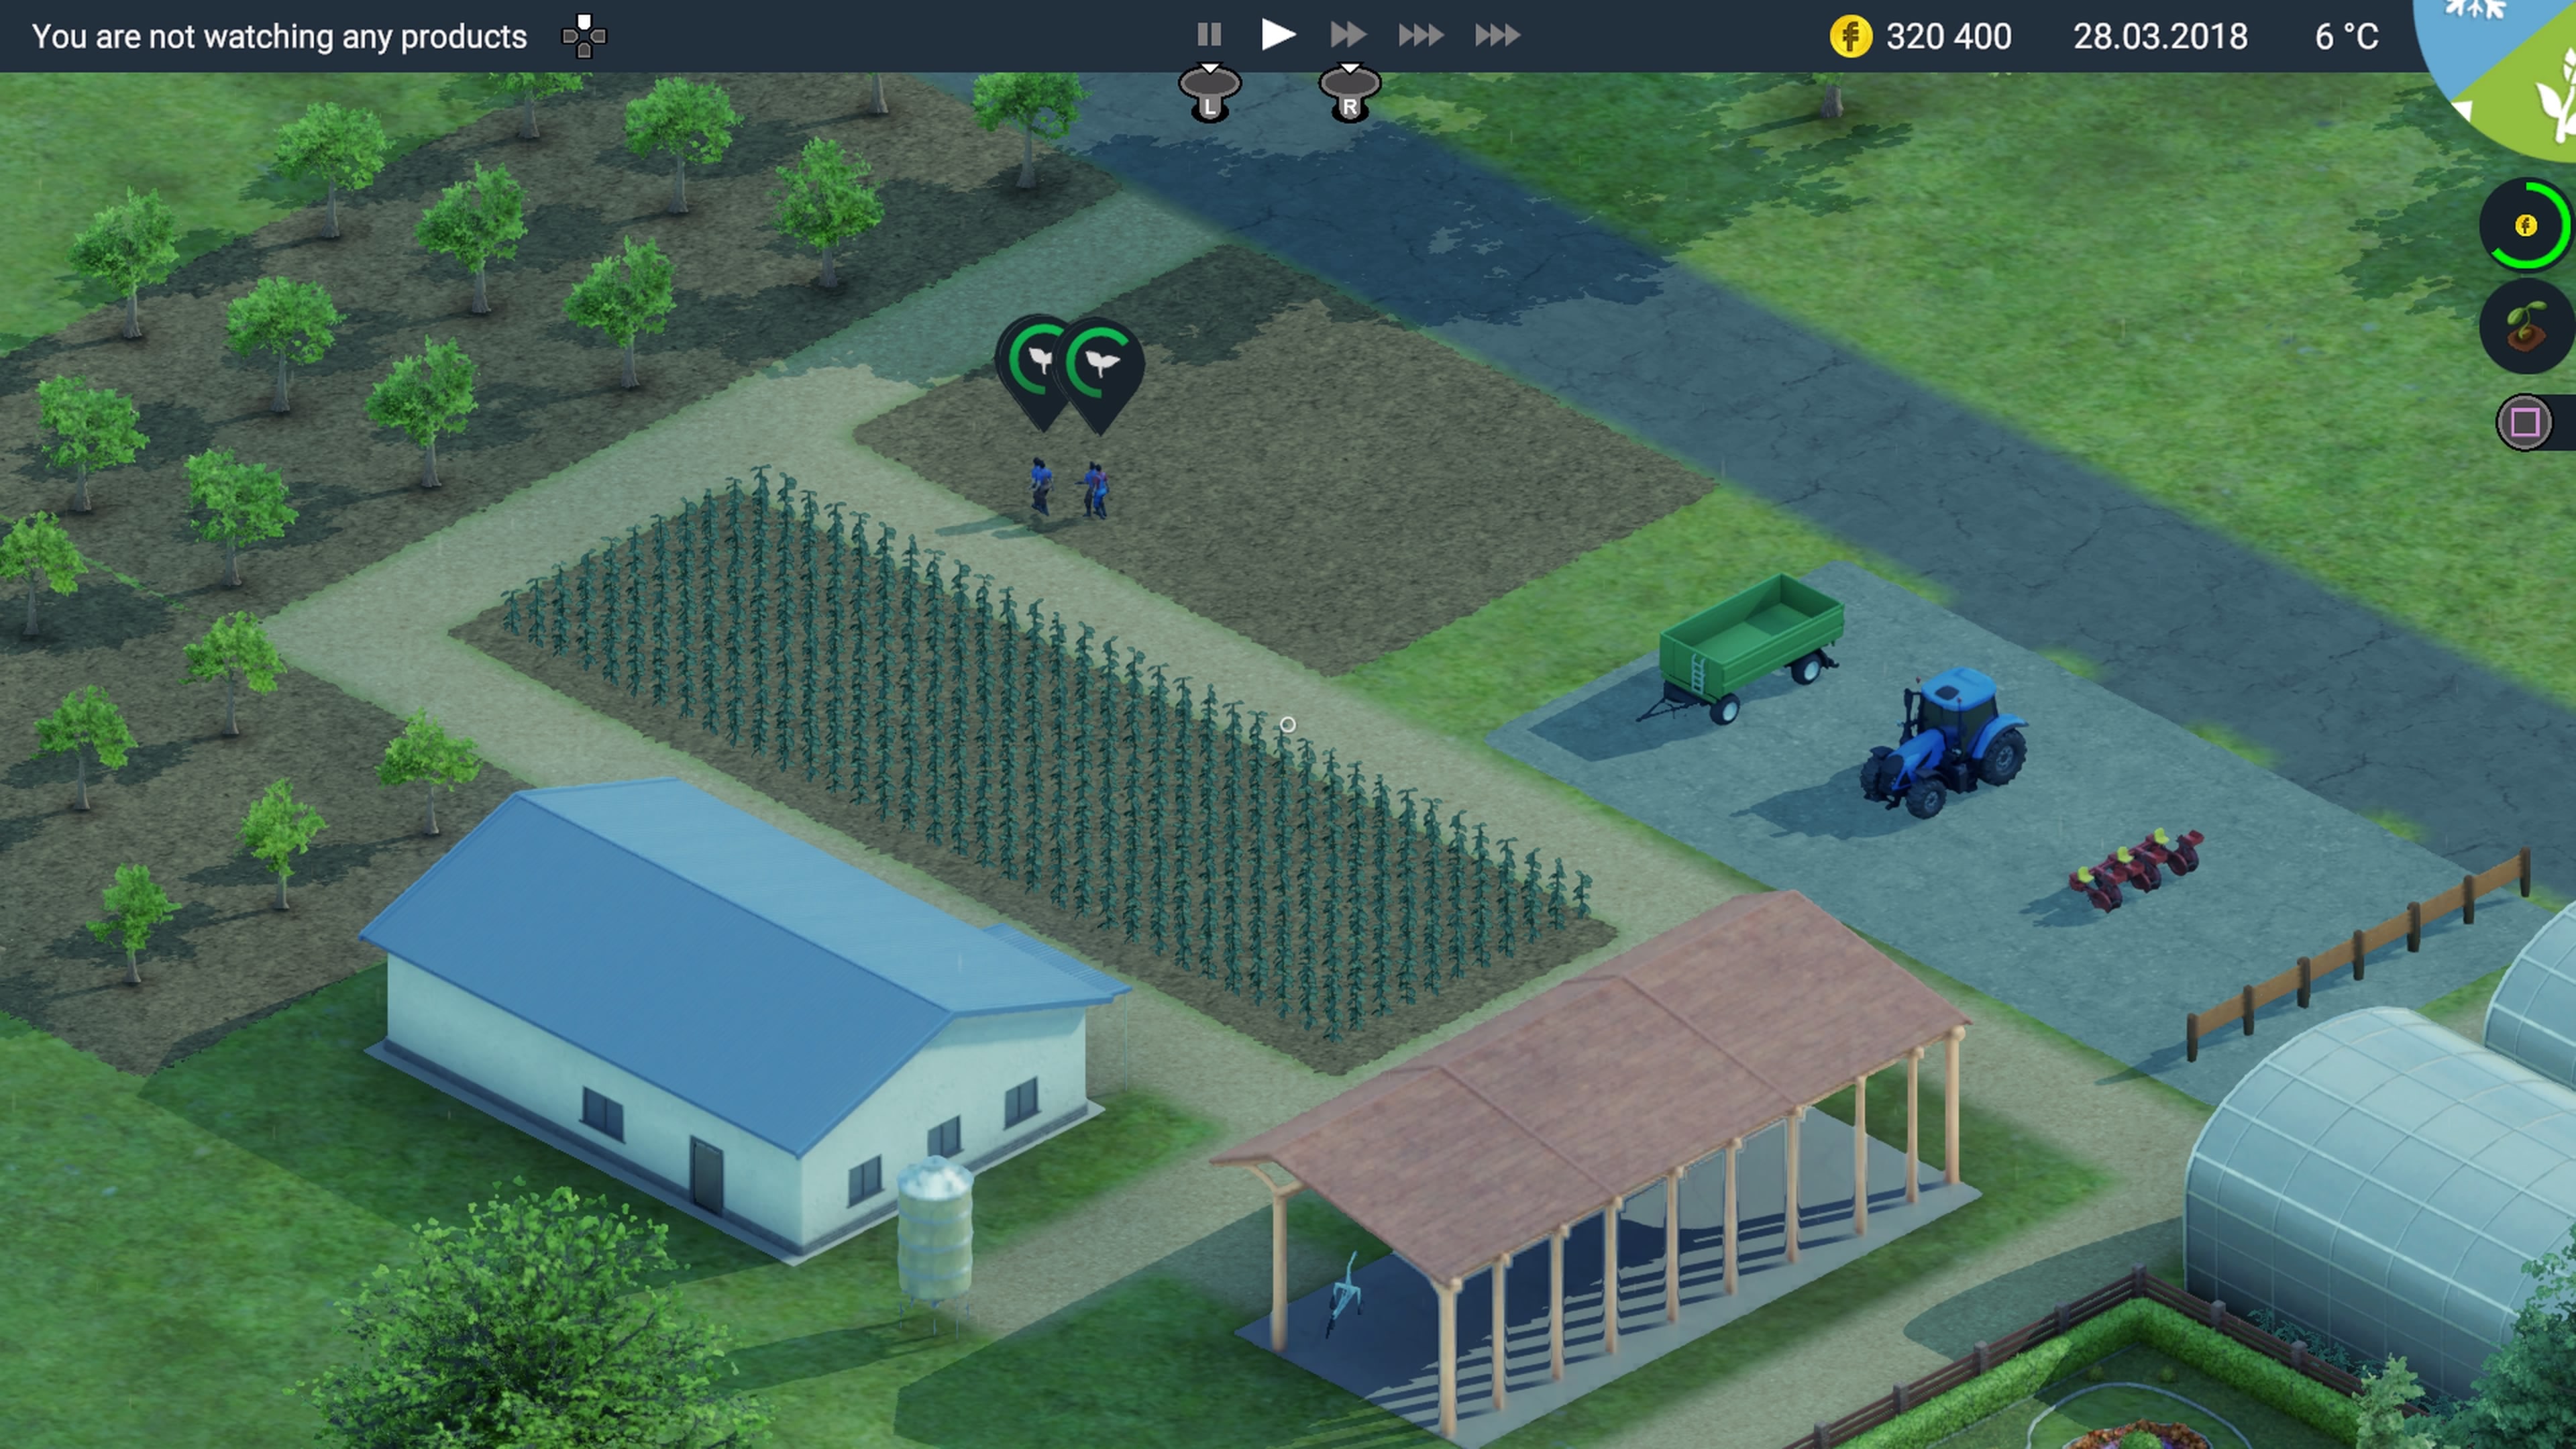 Farm Tycoon PS5 — buy online and track price history — PS Deals